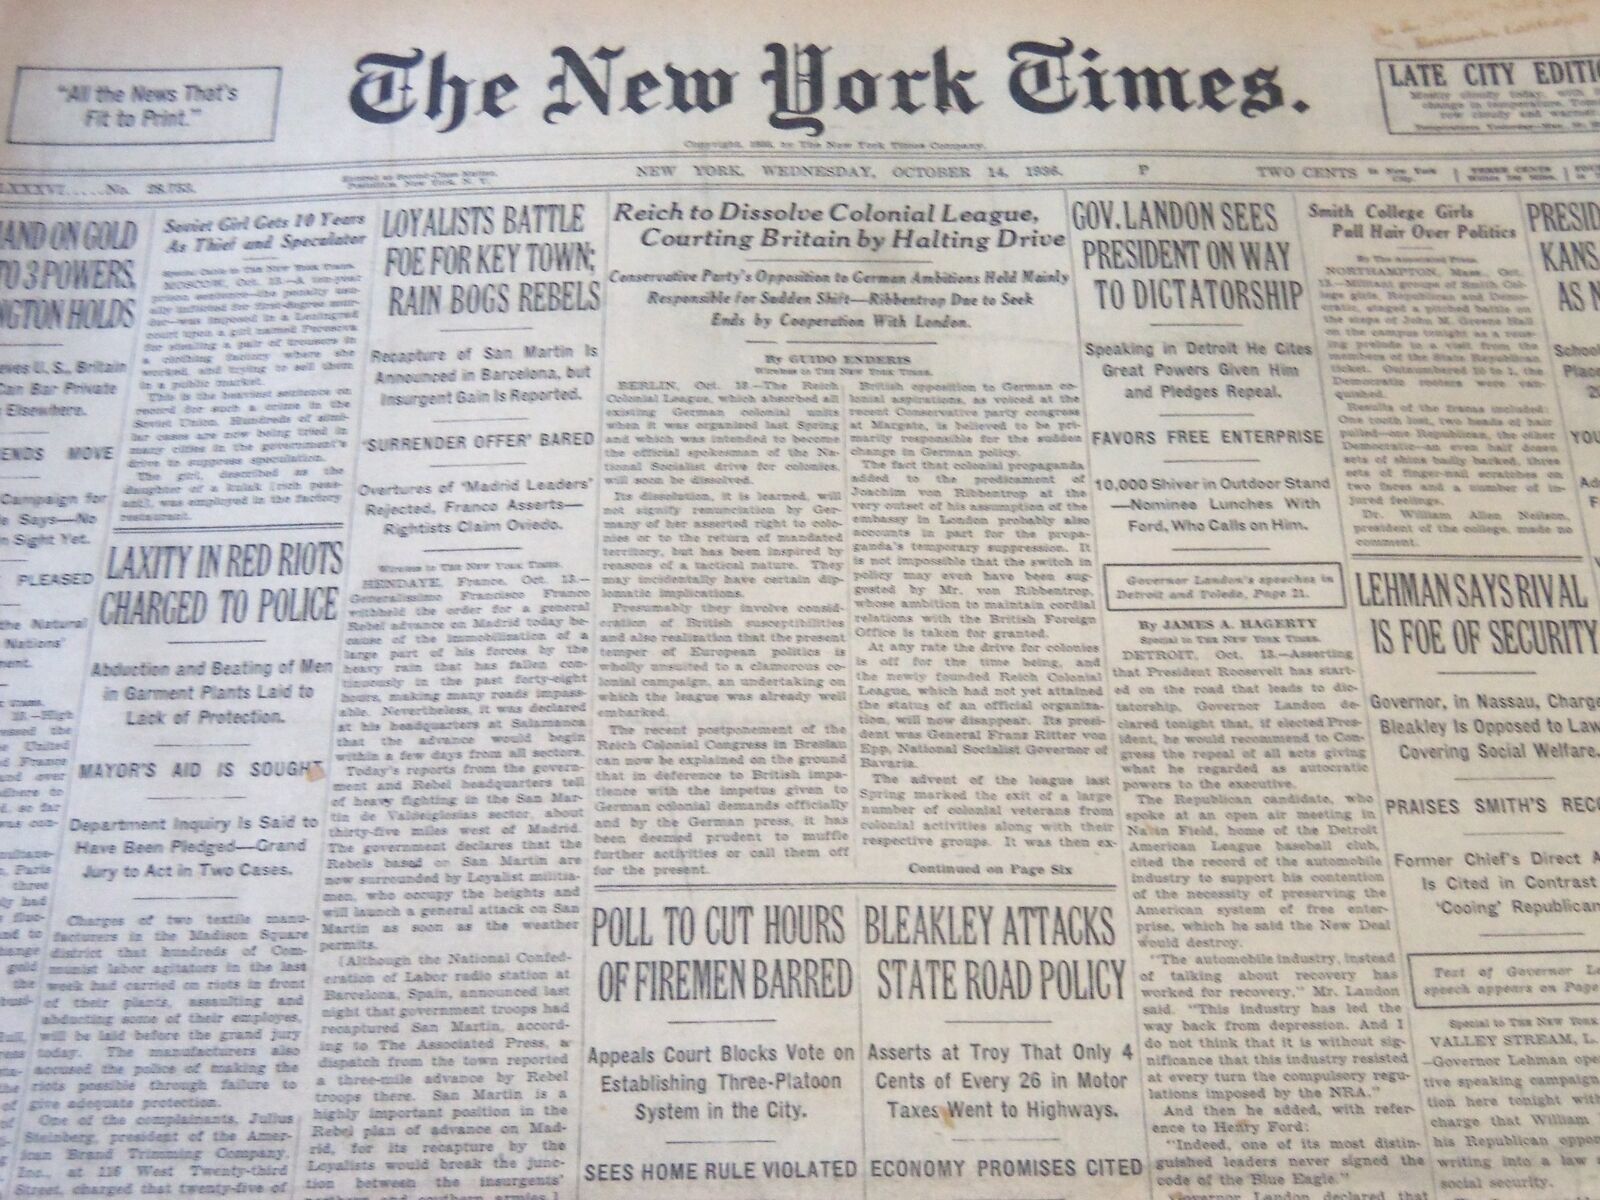 1936 OCTOBER 14 NEW YORK TIMES - REICH TO DISSOLVE COLONIAL LEAGUE - NT 6693